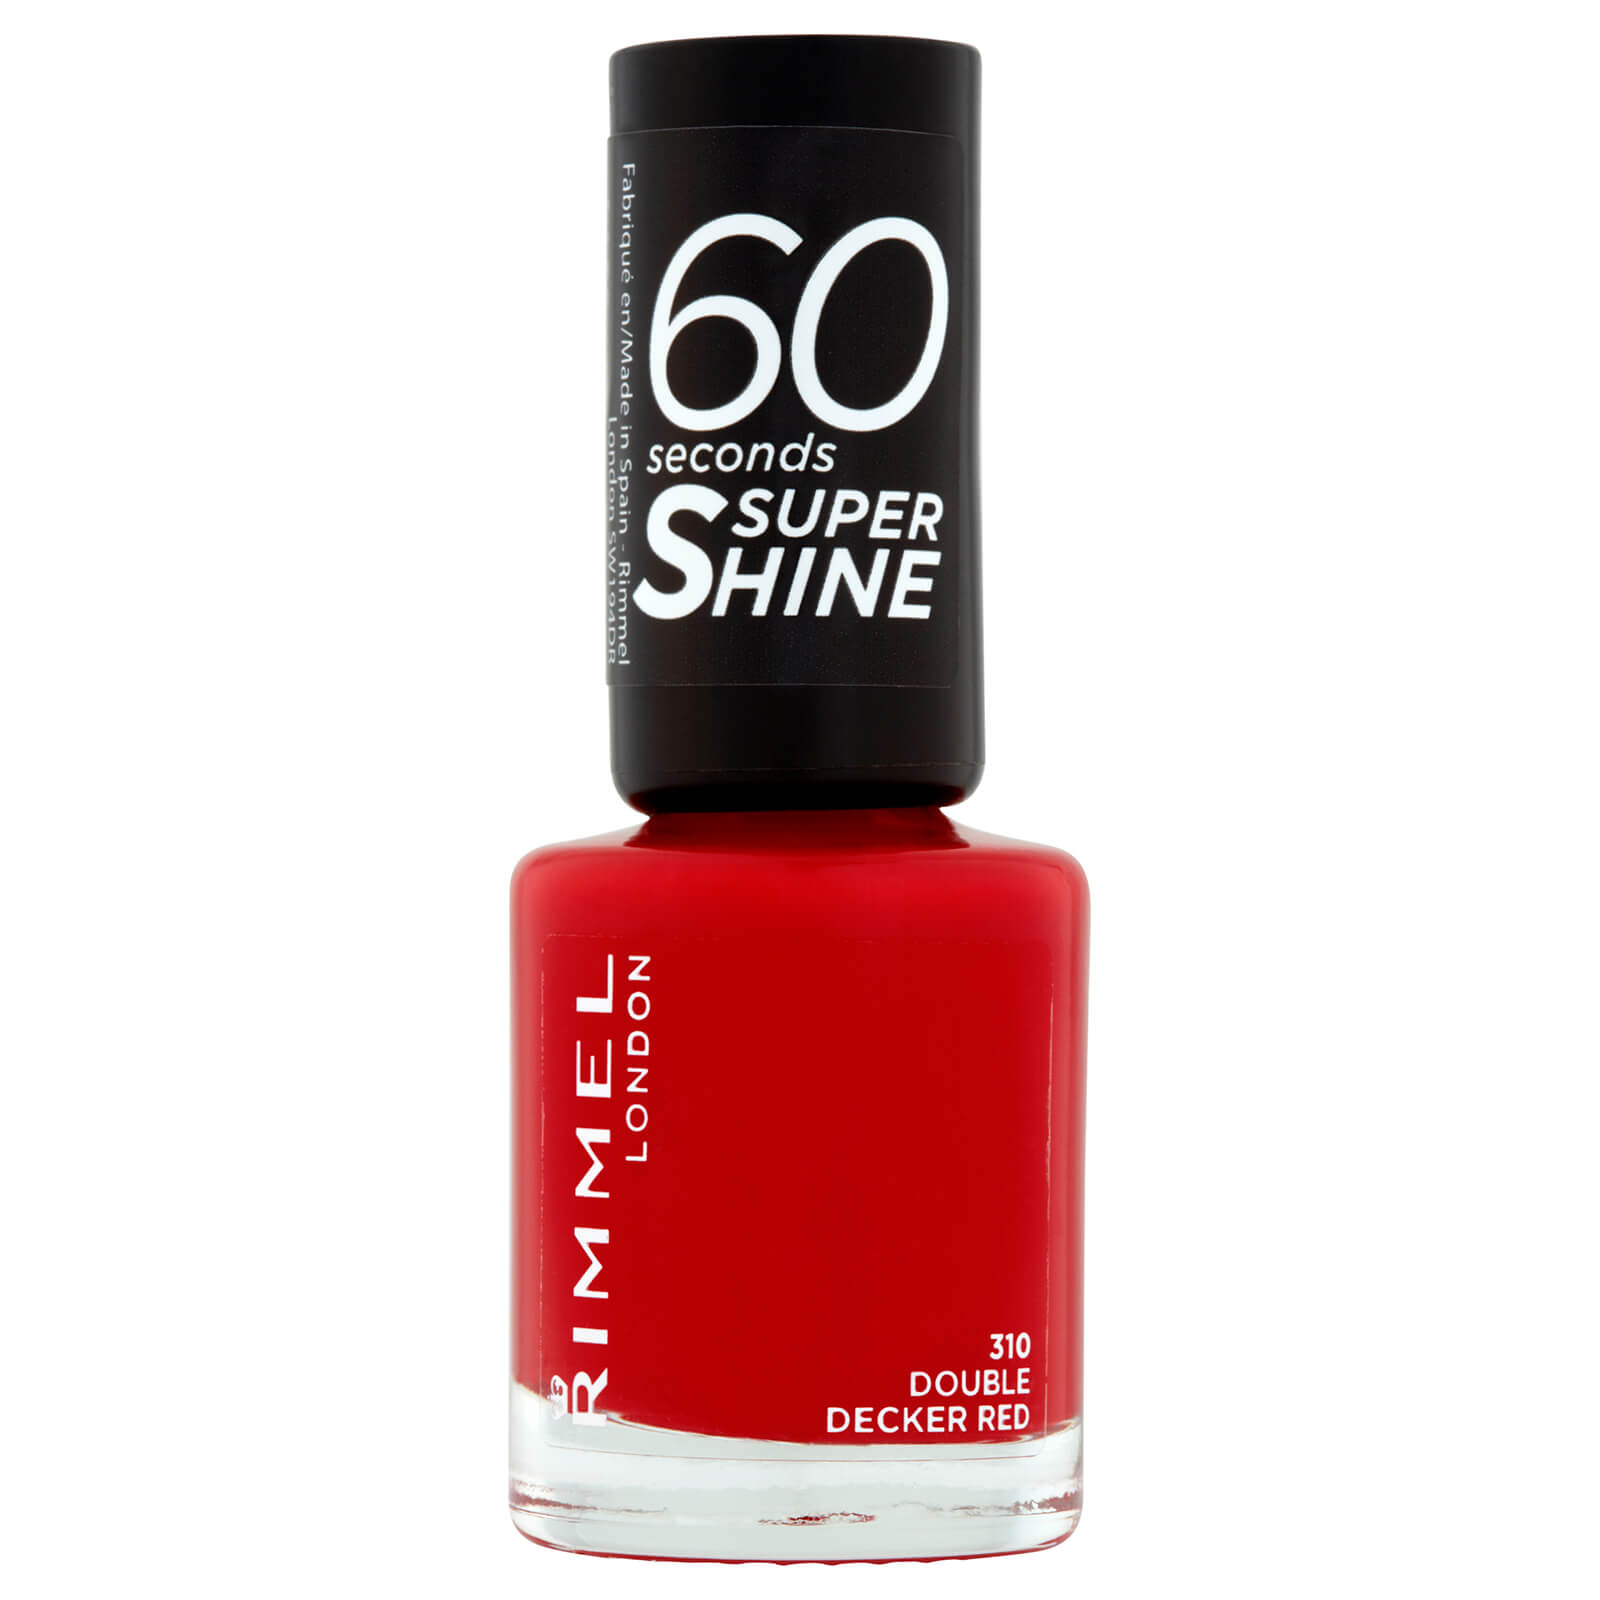 Rimmel 60 Seconds Super Shine Nail Polish 8ml (Various Shades) - 1 Double Decker Red